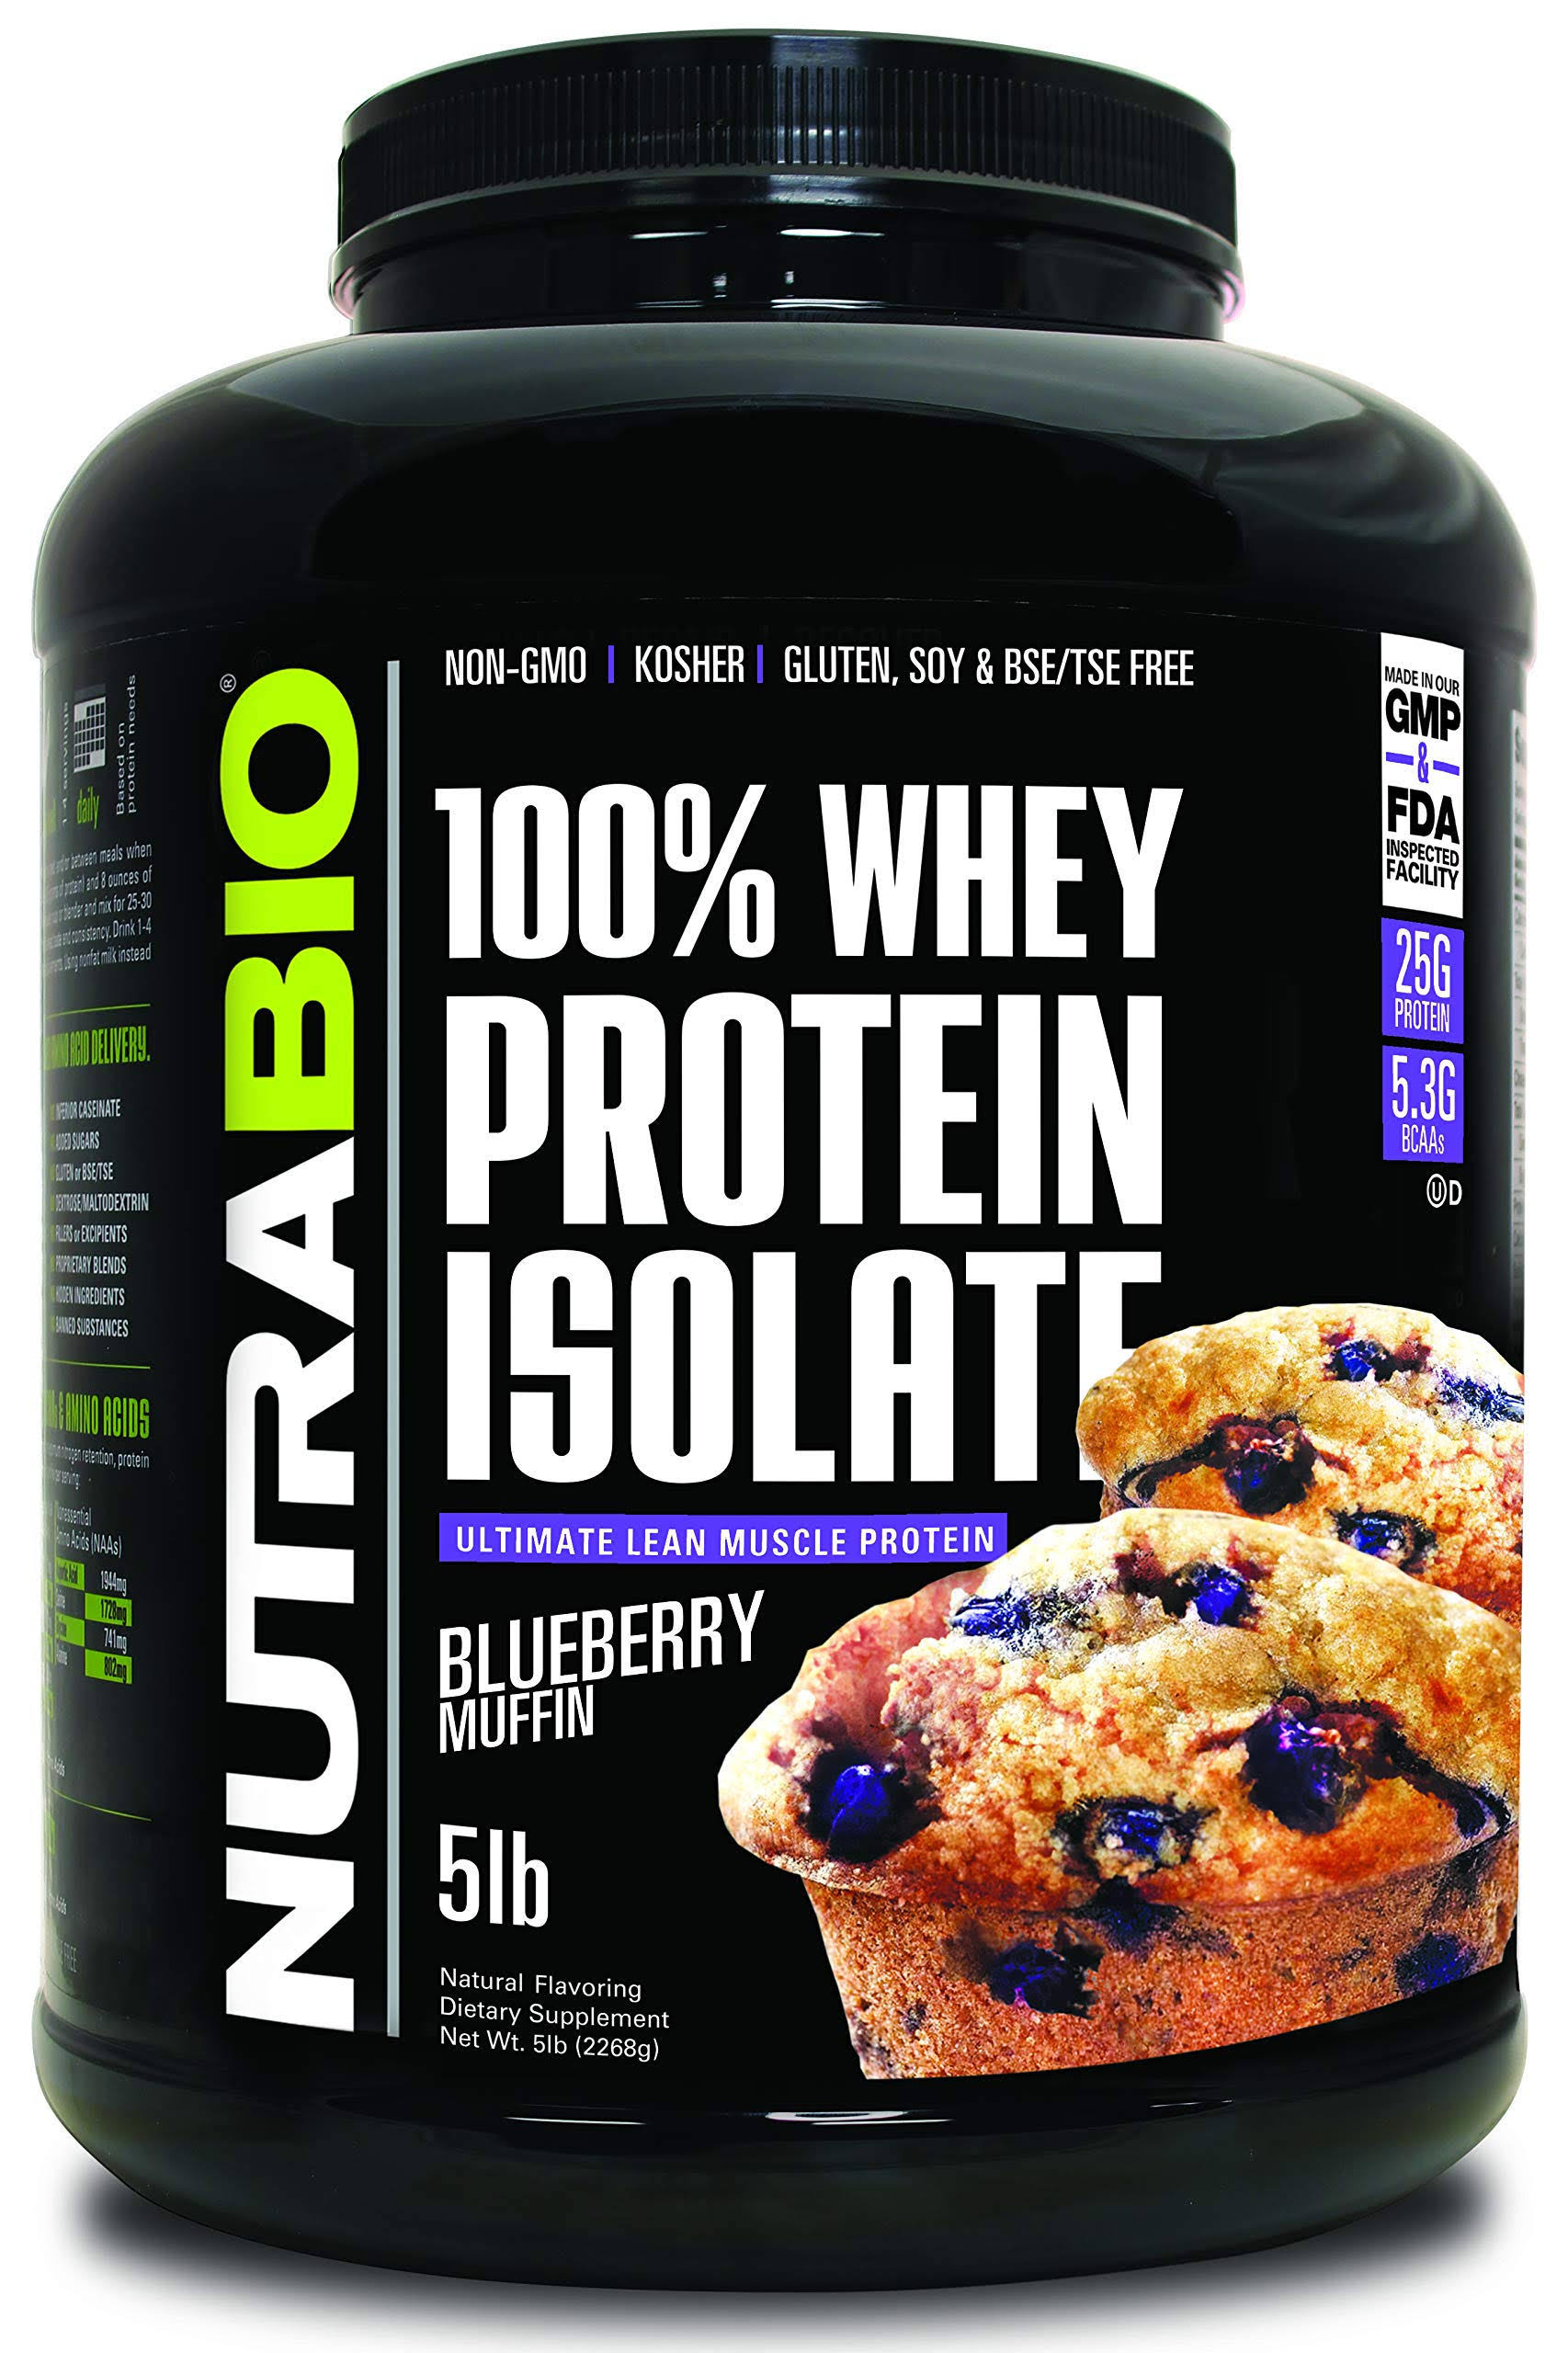 NutraBio 100% Whey Protein Isolate - Blueberry Muffin, 5lb